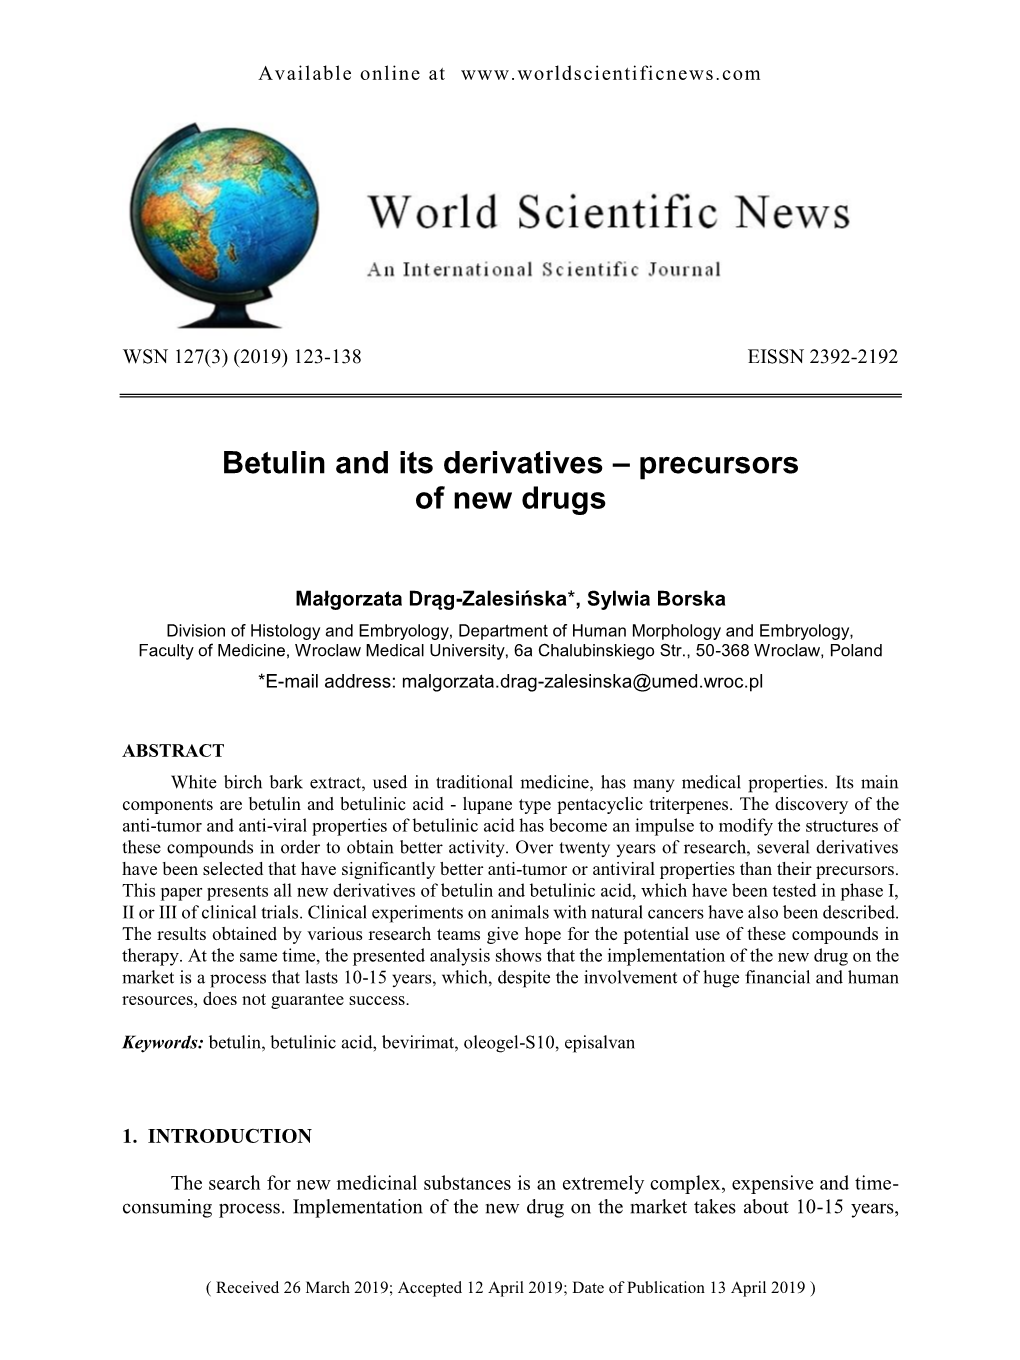 Betulin and Its Derivatives – Precursors of New Drugs